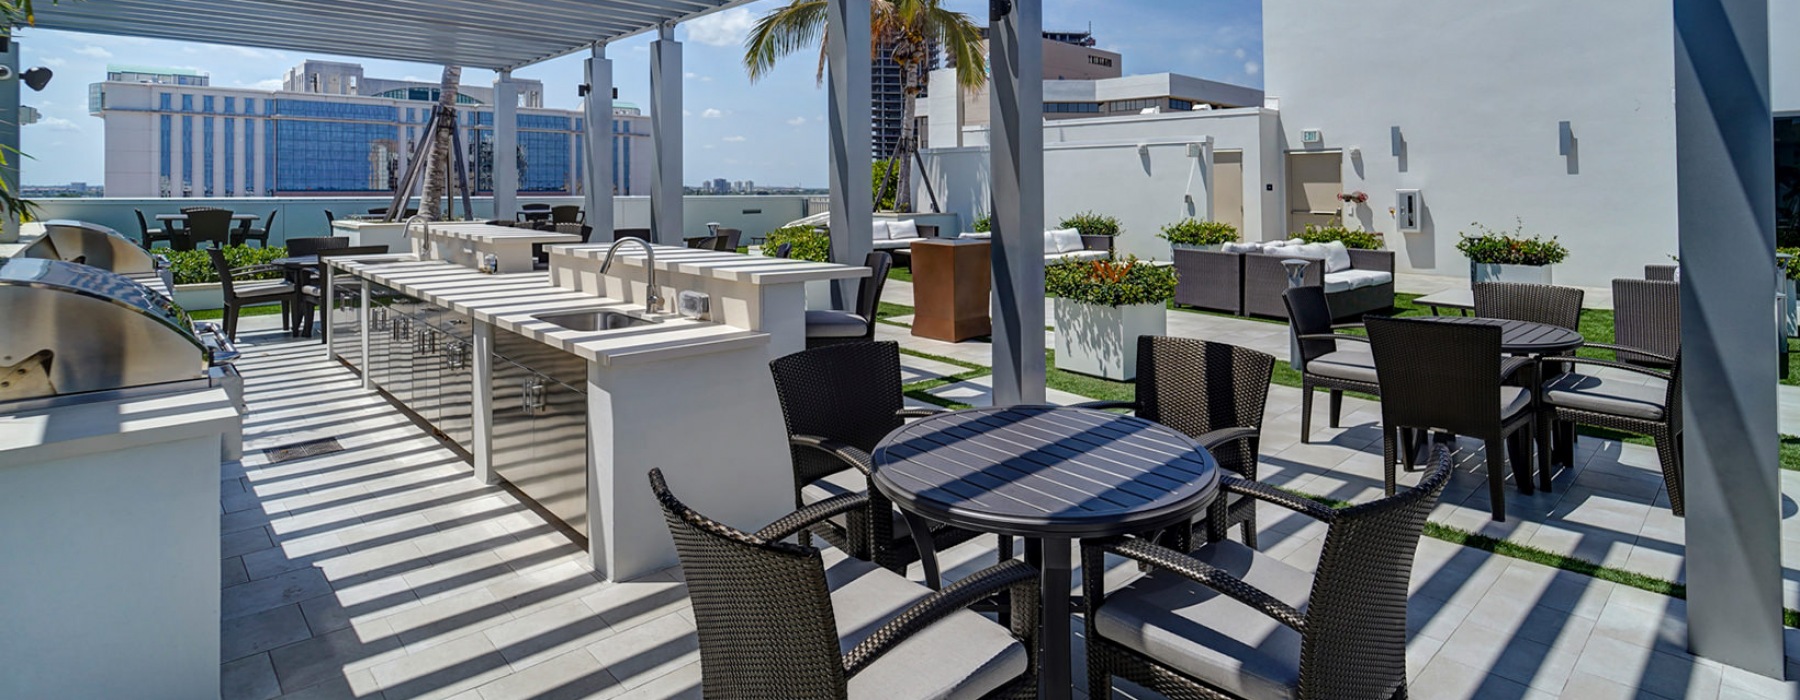 Oversea at Flagler Banyan Square outdoor grill and lounge area. 